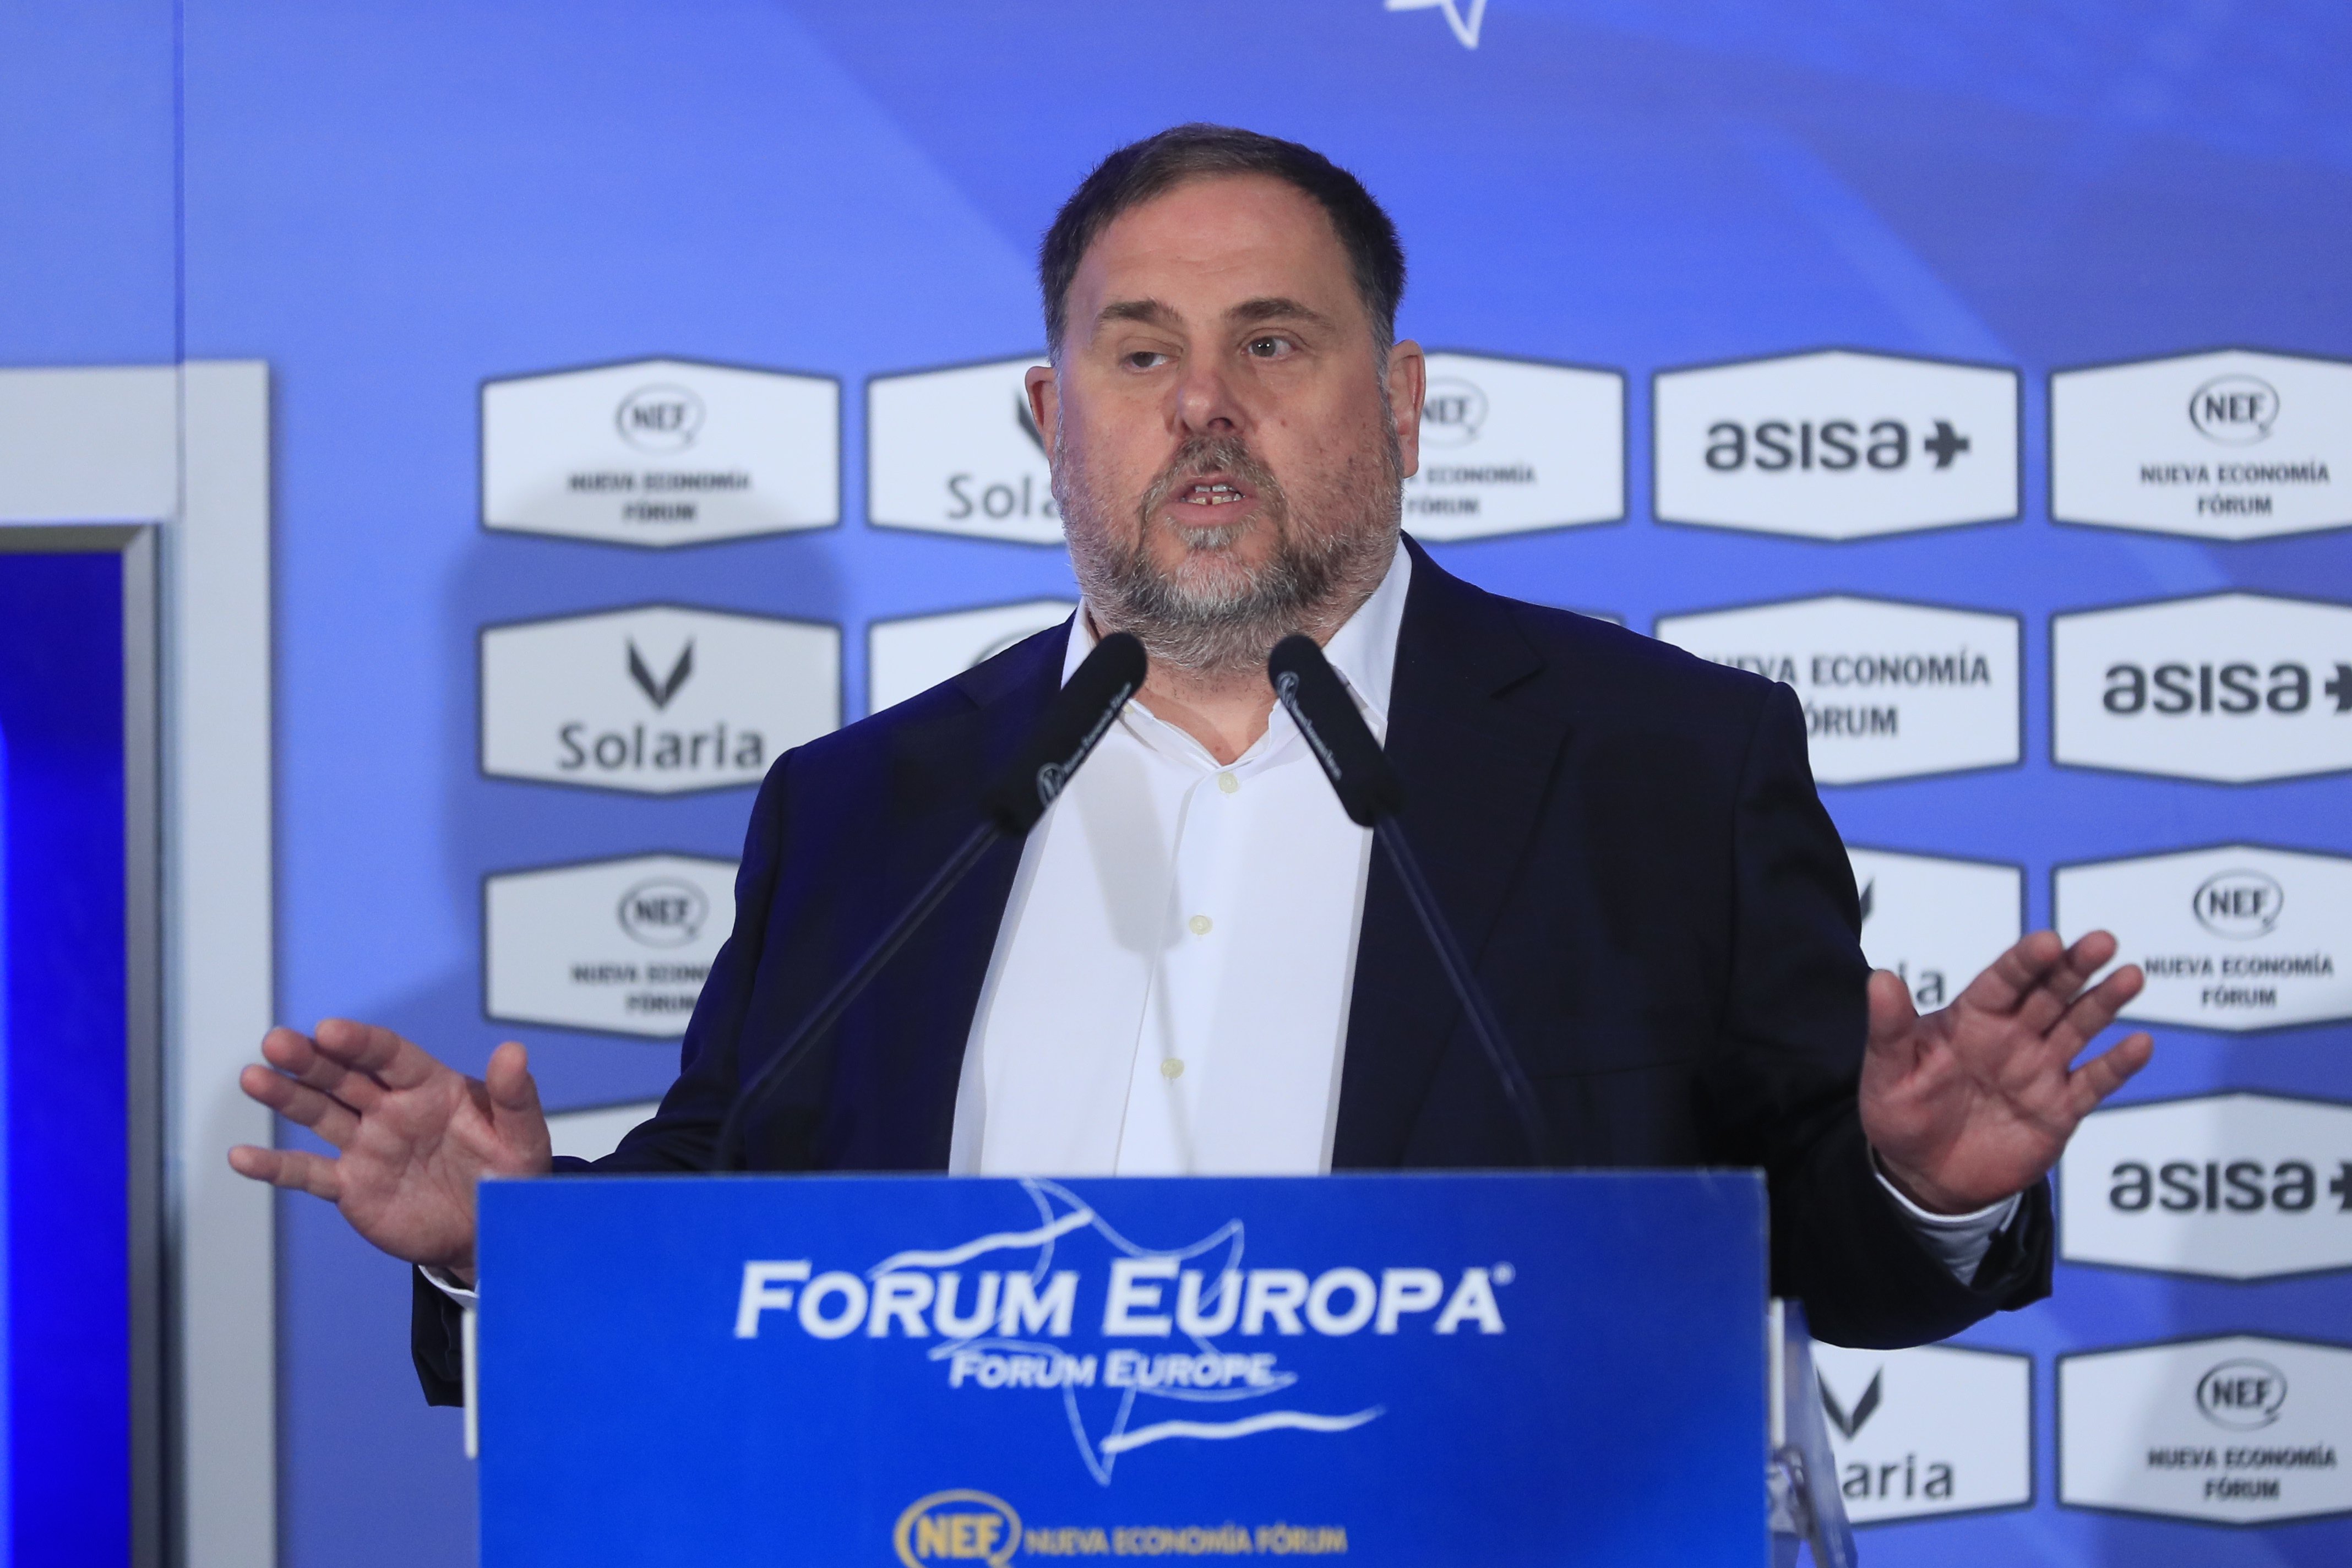 Junqueras rejects the ANC's 2023 date for independence: "It's not a question of time"